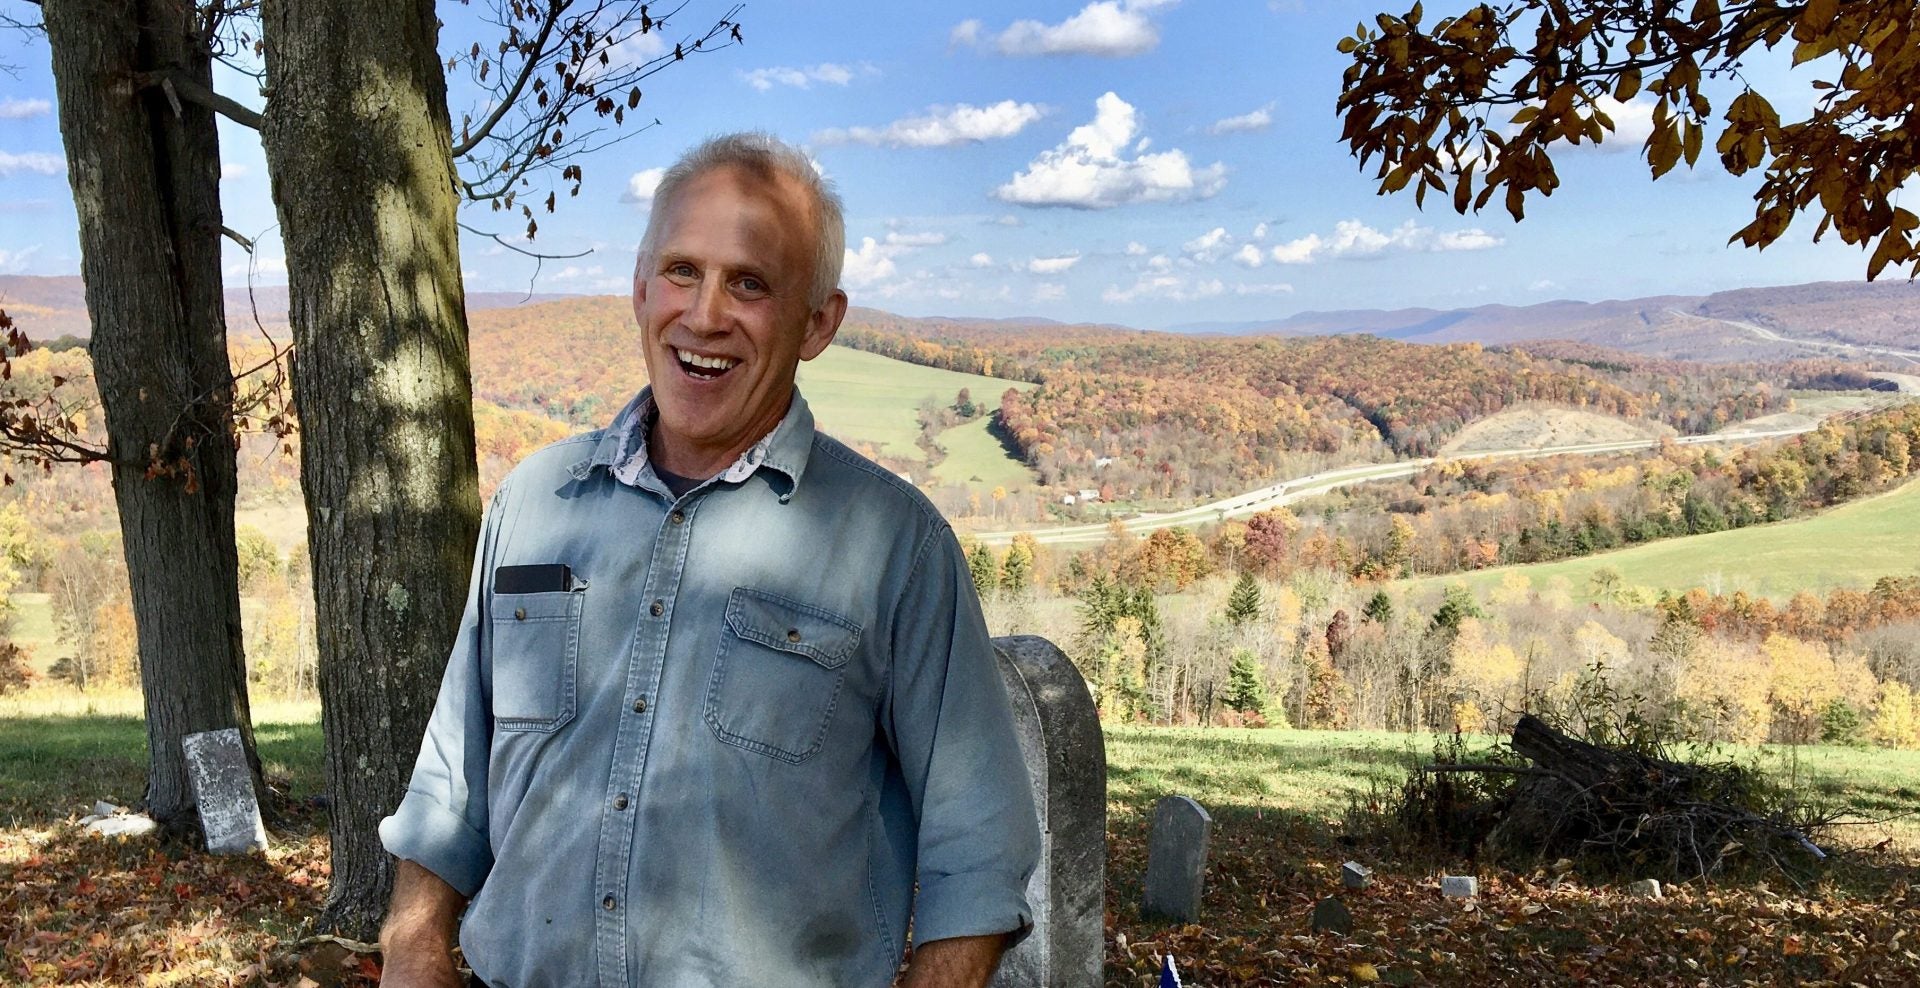 As election nears, Pennsylvania farmers — who see effects of climate change up close — have a list of things they'd like to see from government leaders - WHYY